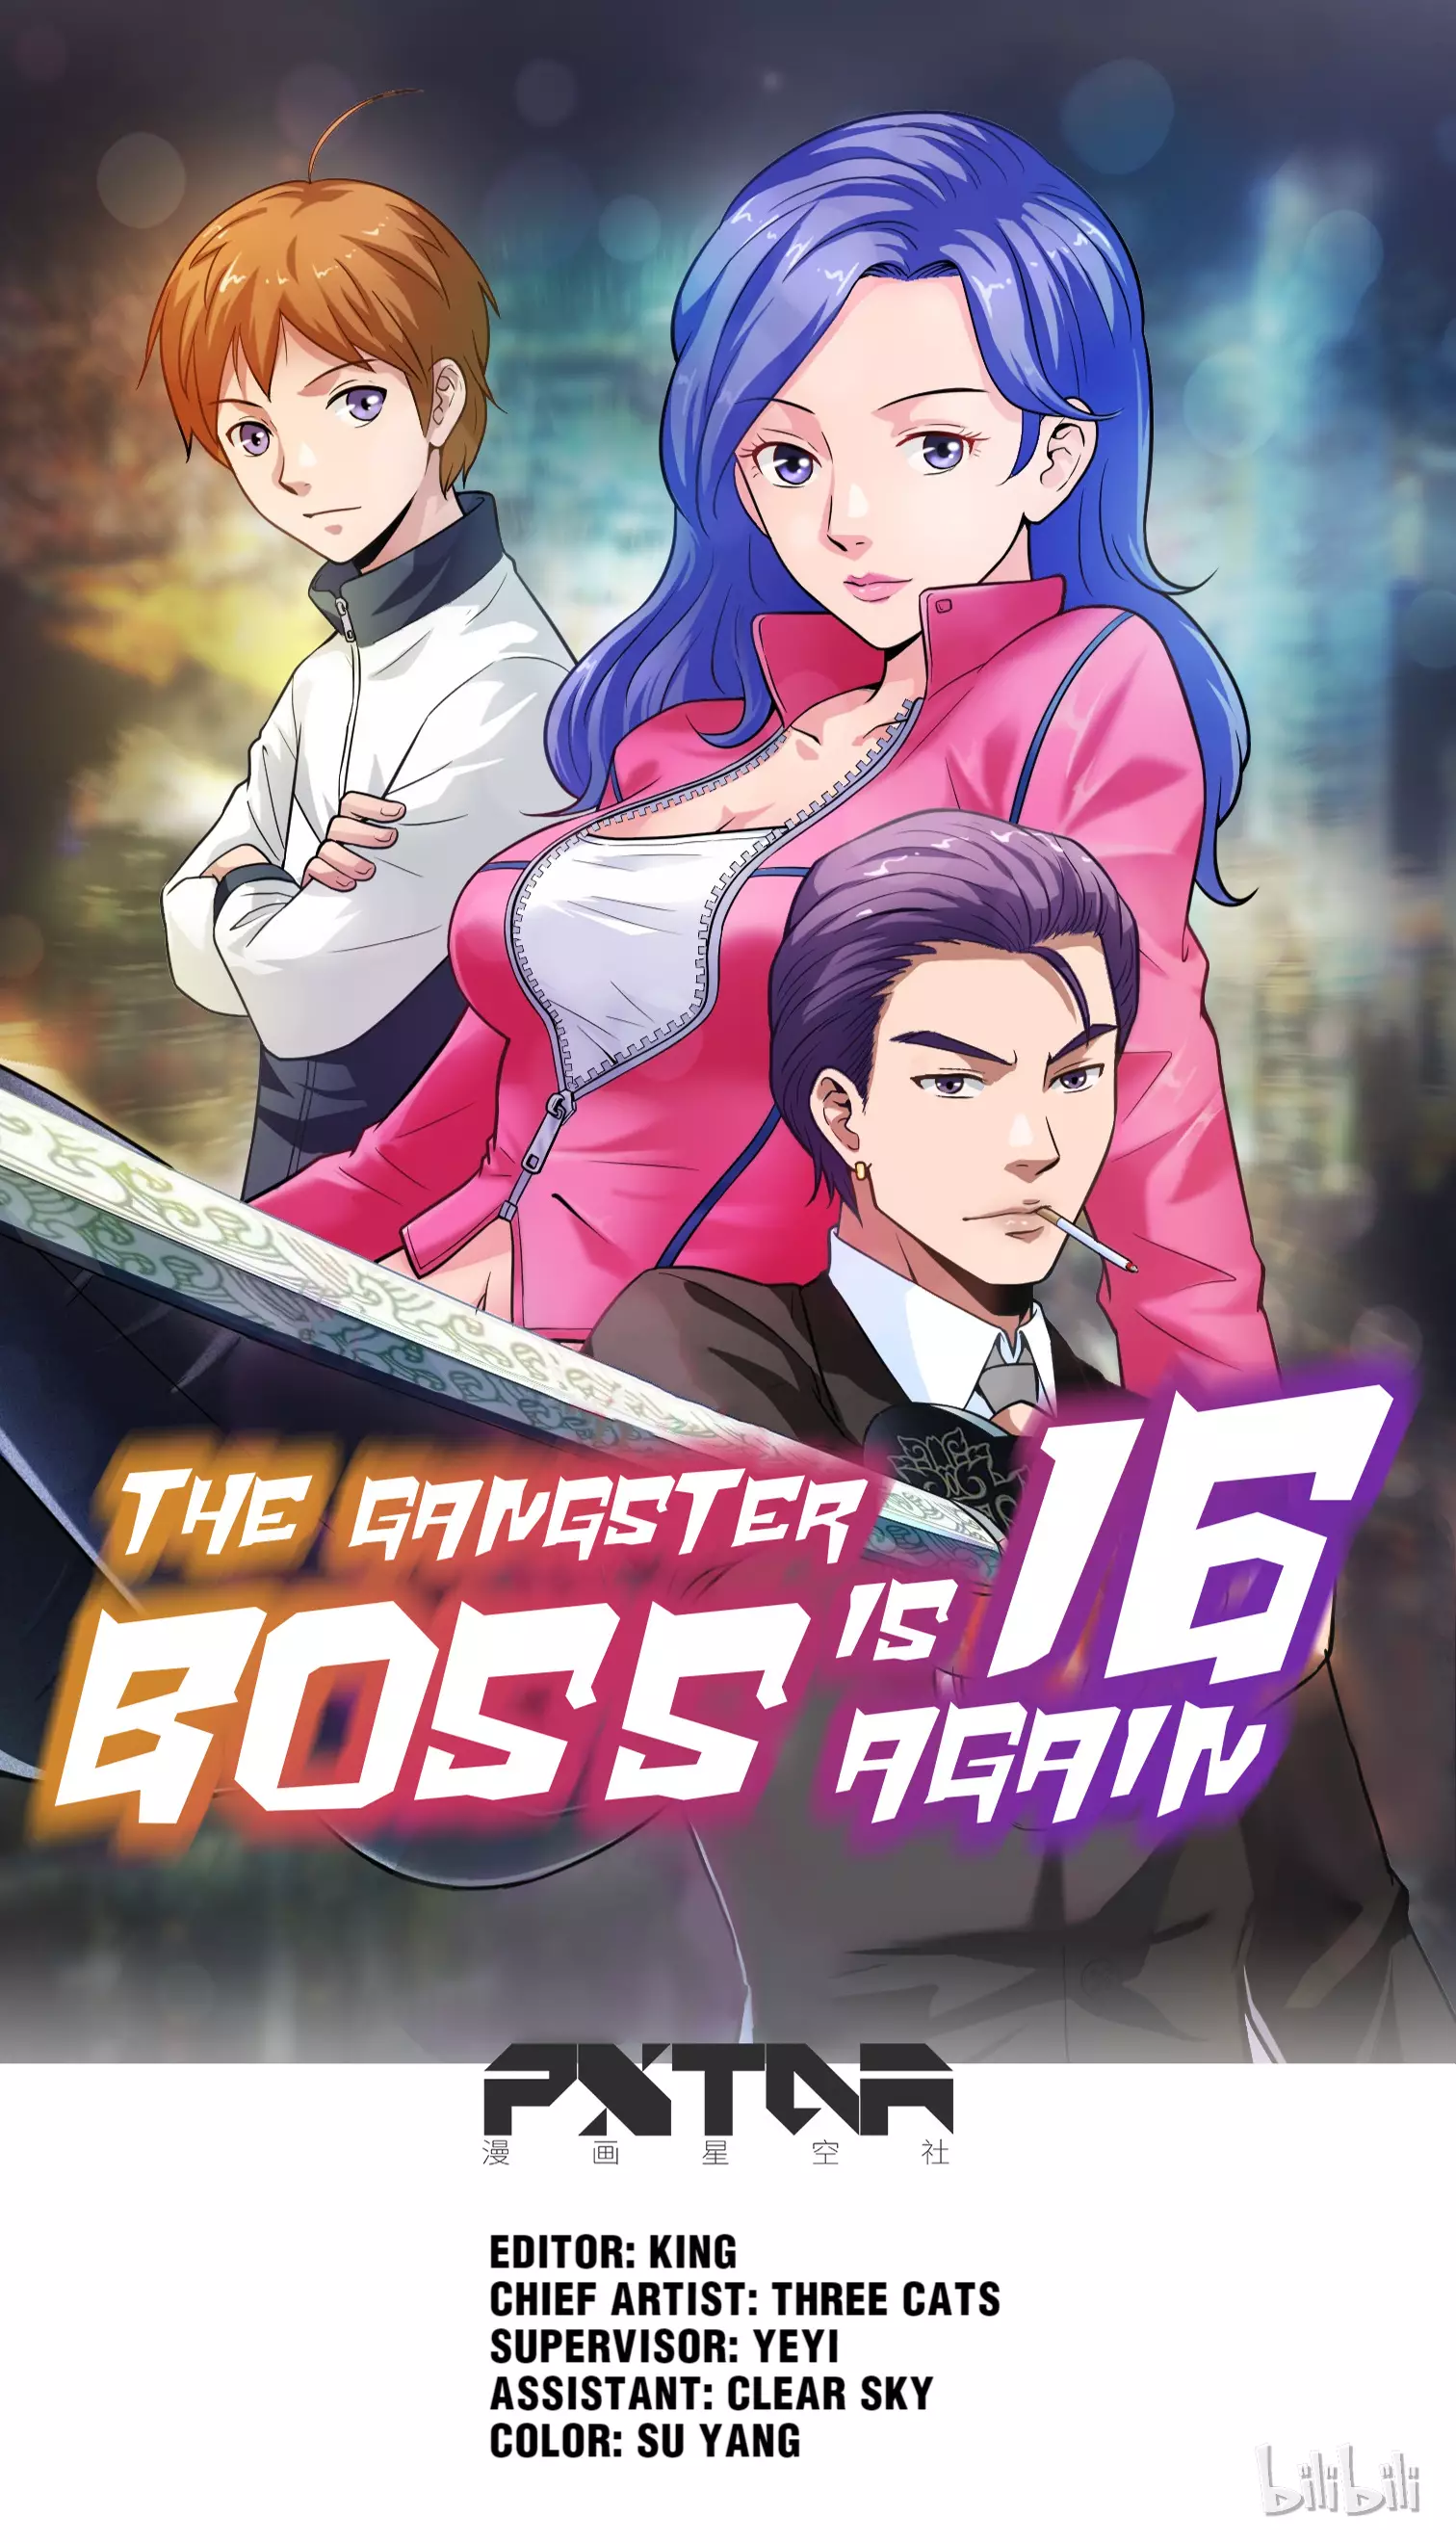 The Gangster Boss Is 16 Again - 65.1 page 1-fbb86600